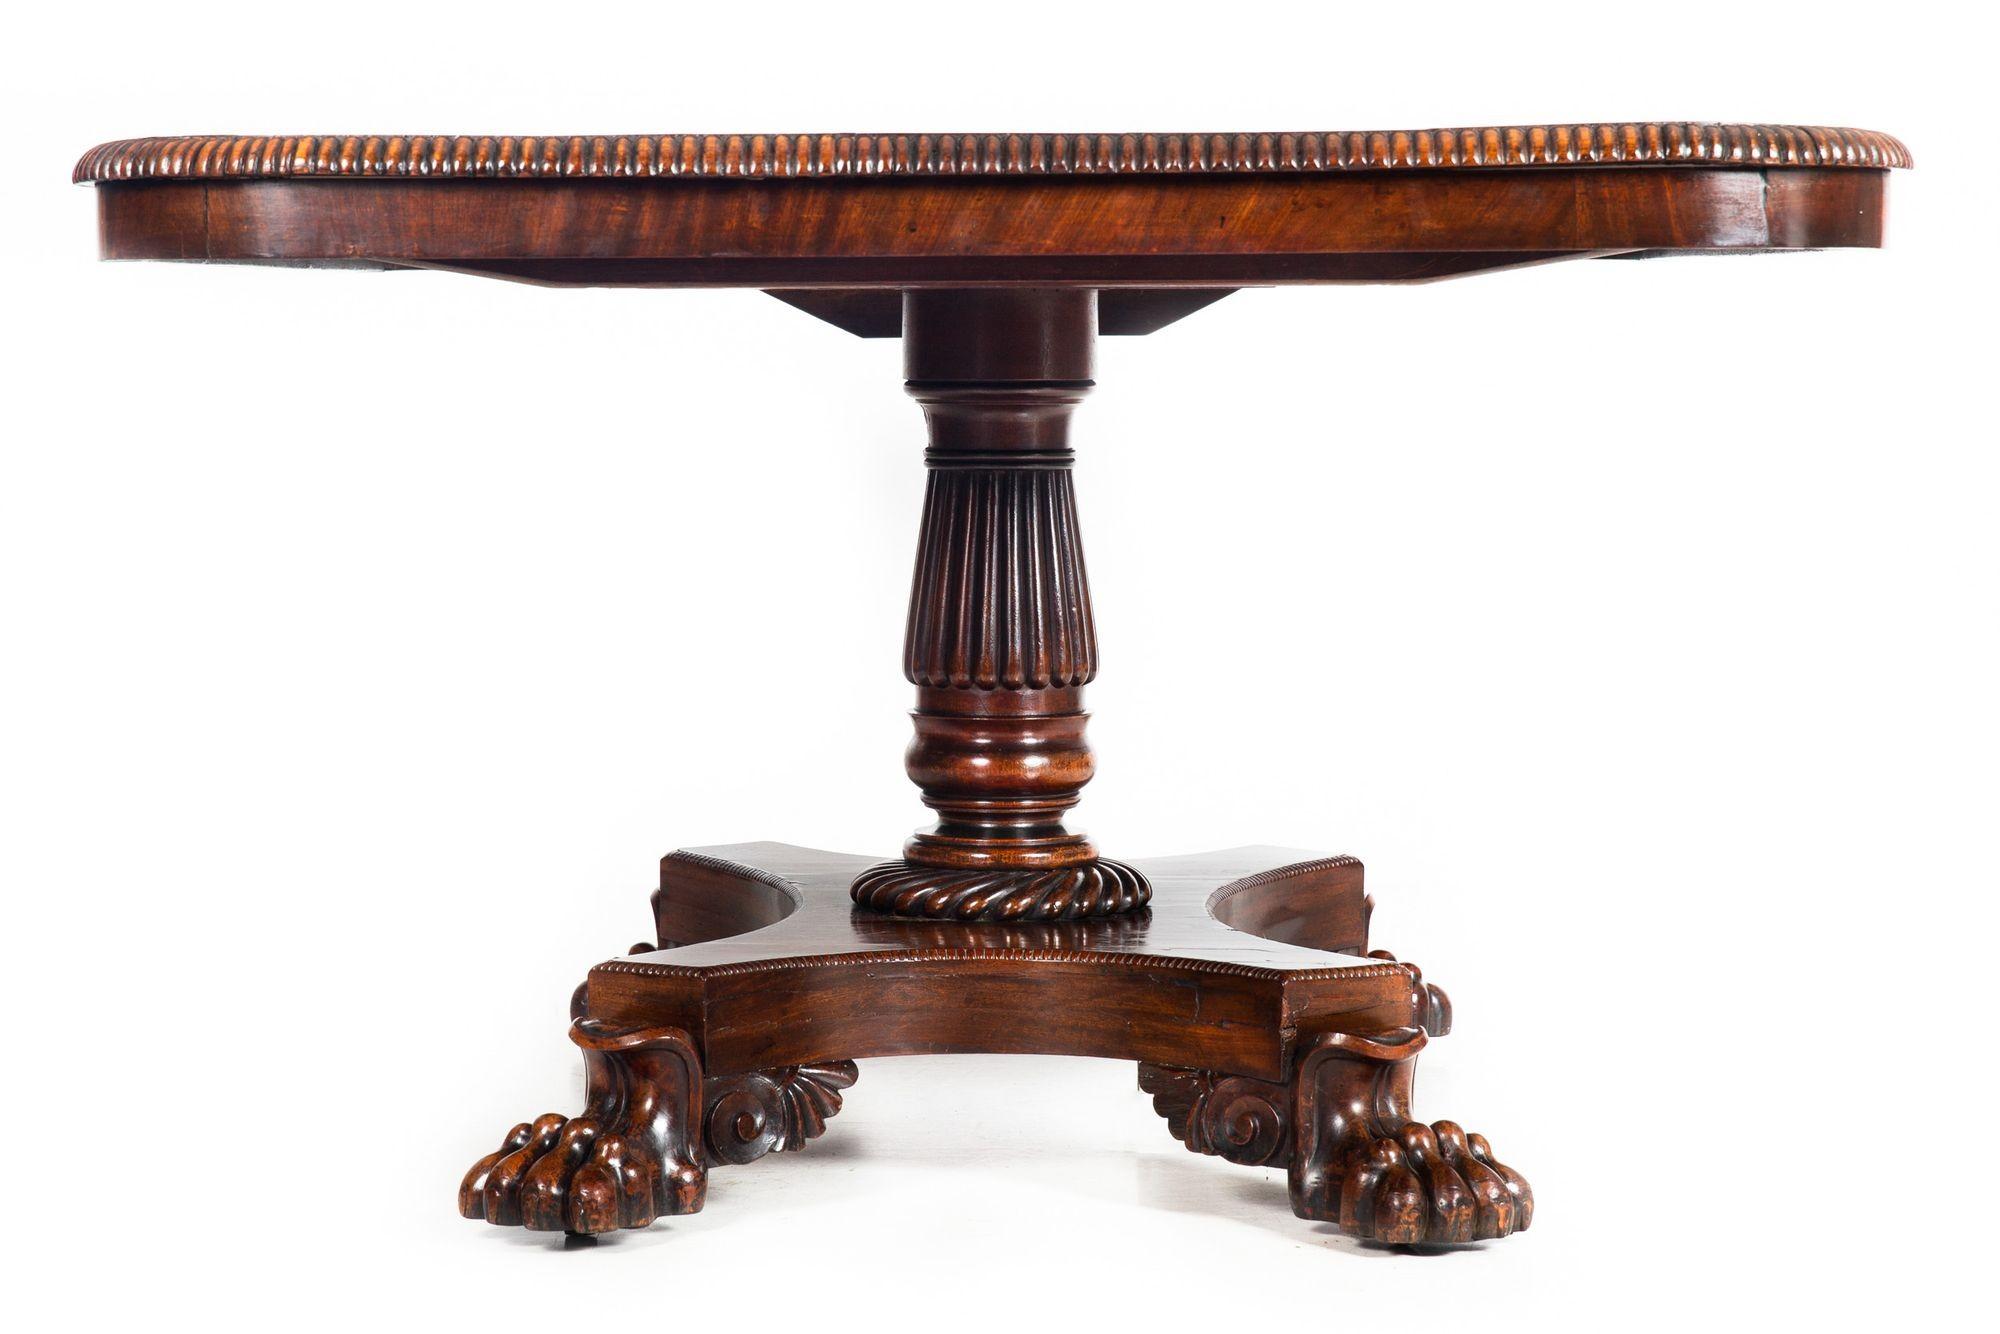 Circa 1840 English William IV Flame Mahogany Tilting Breakfast Table For Sale 1